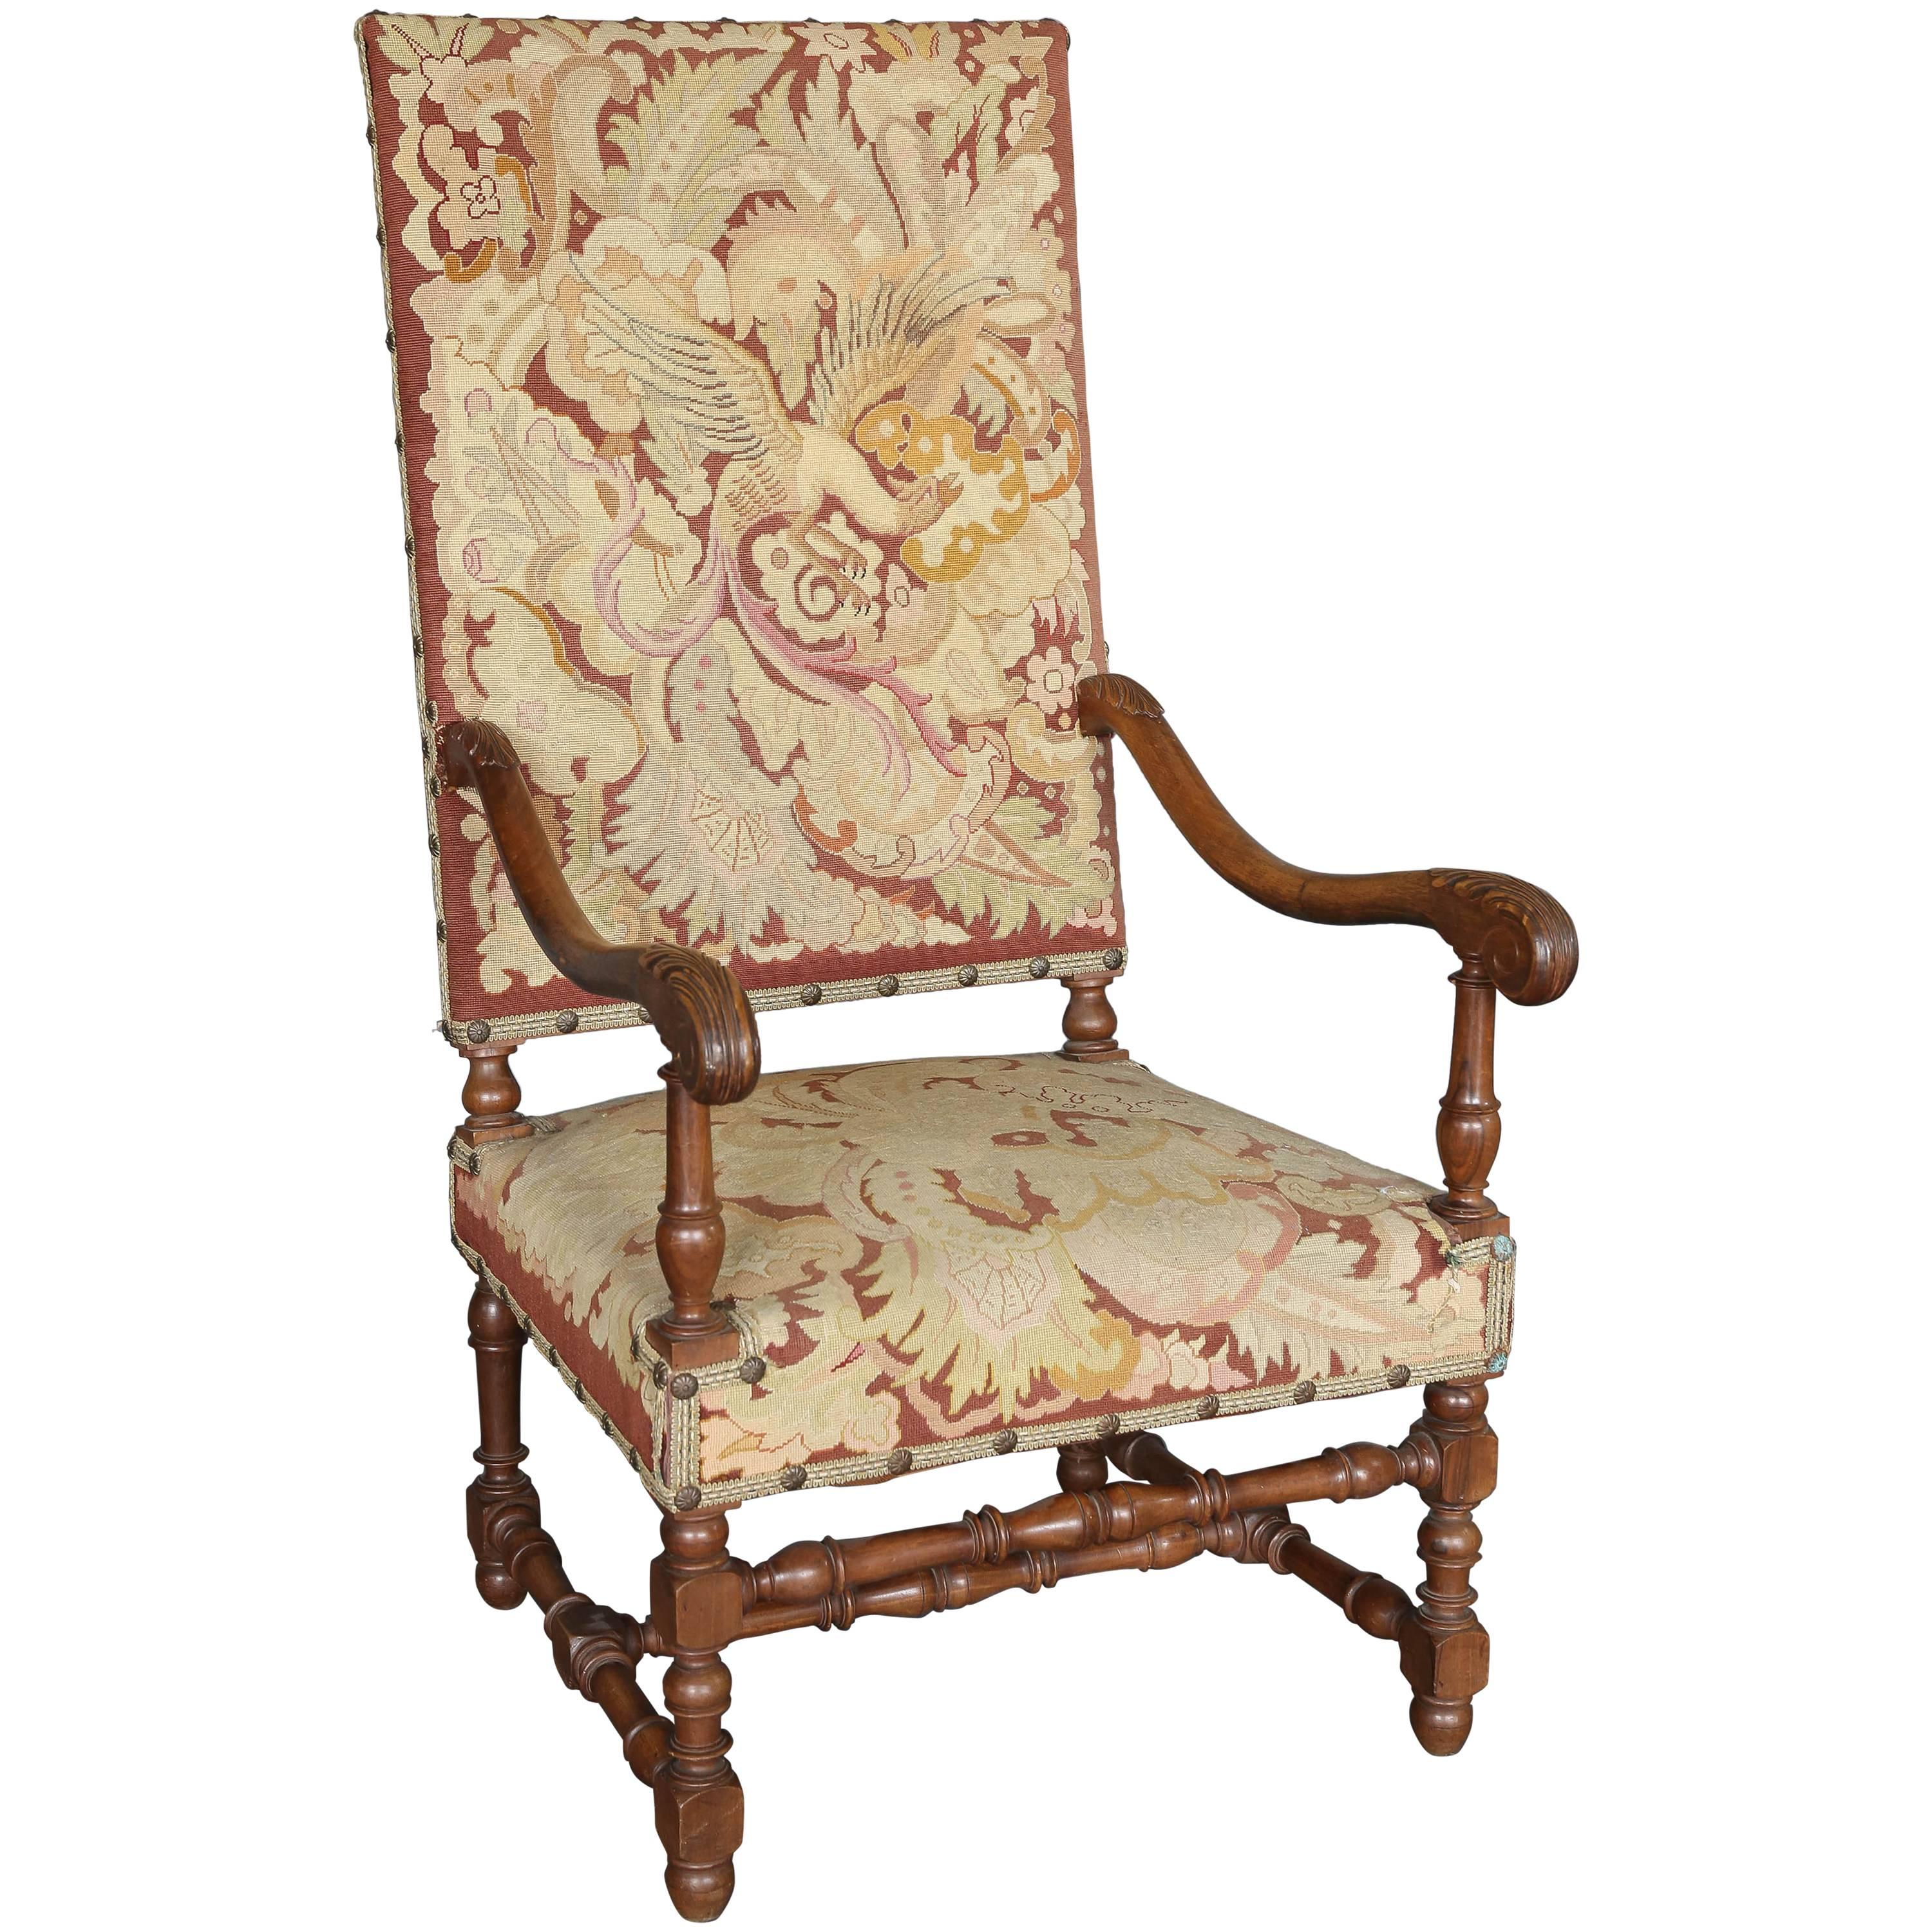 Antique 19th Century Louis XIII Needlepoint Chair For Sale